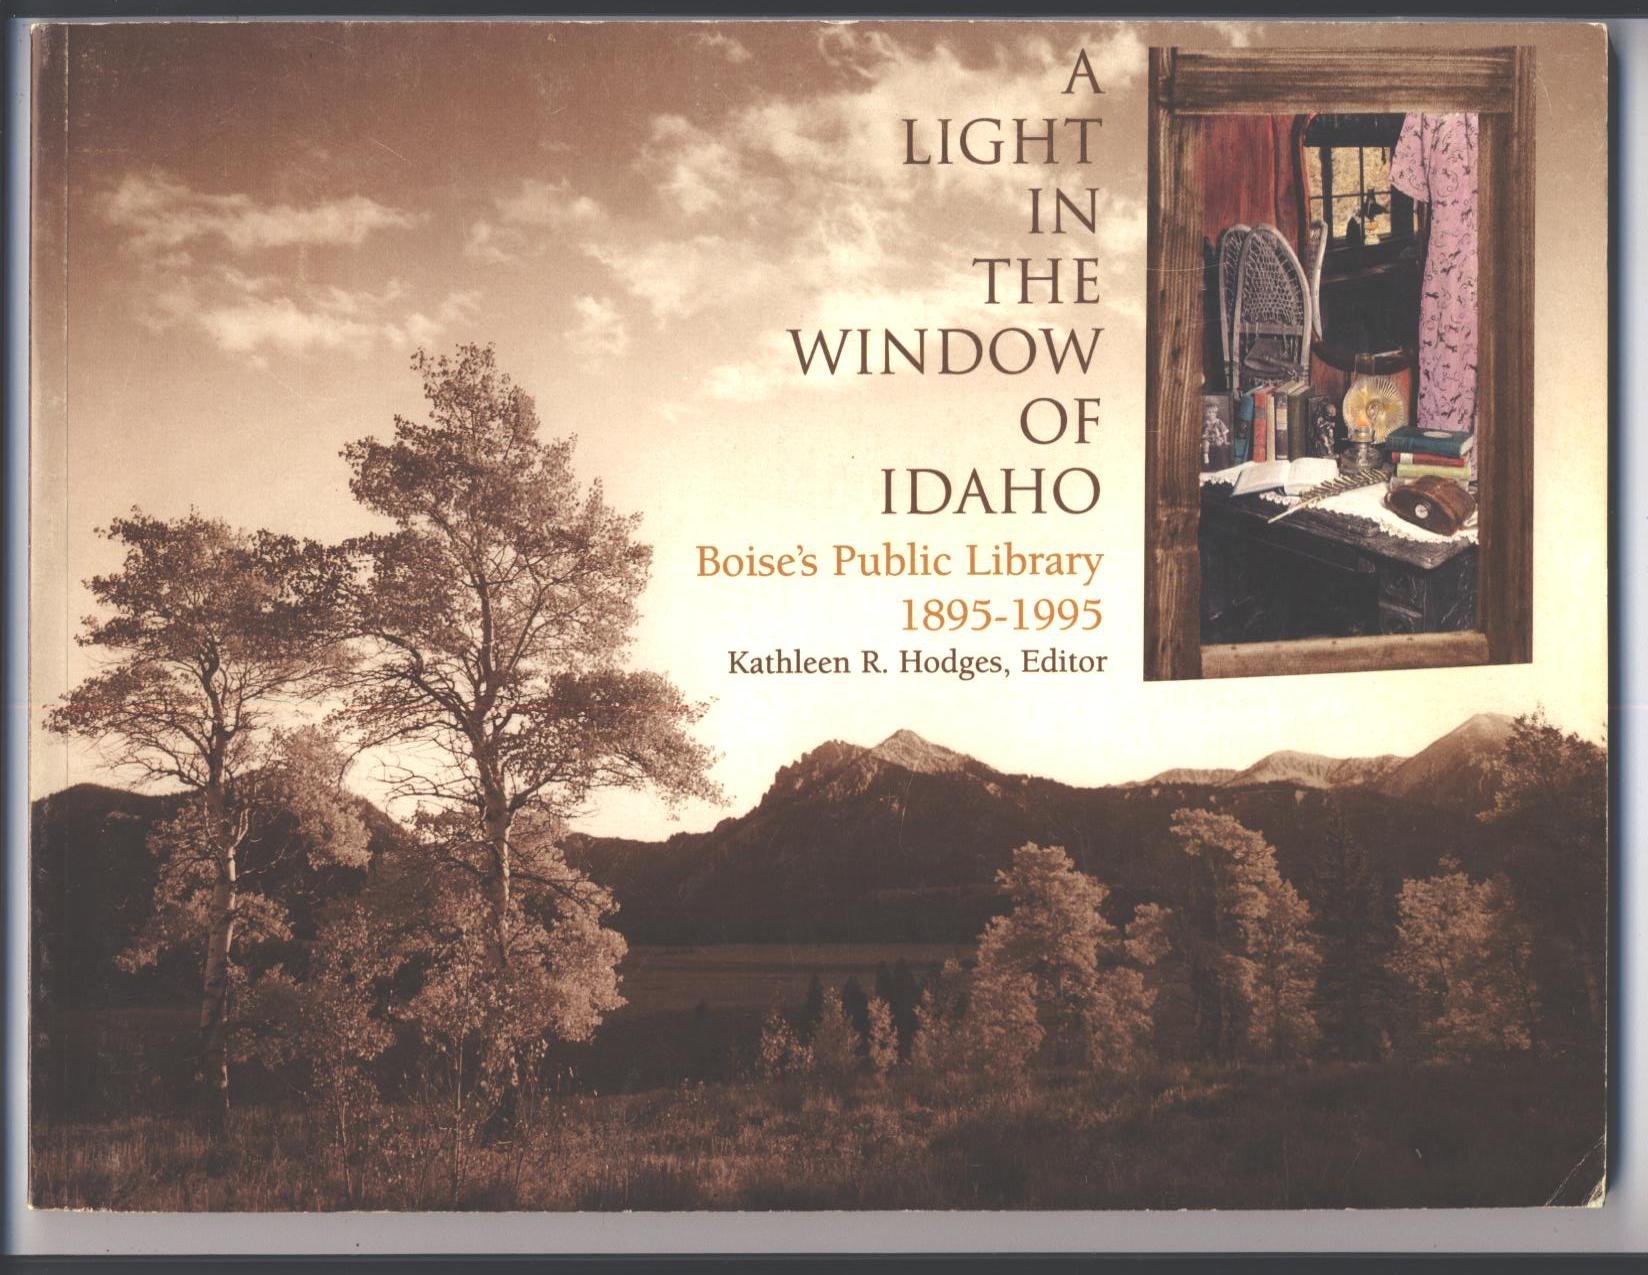 A light in the window of Idaho: Boise's Public Library, 1895-1995 (book cover)